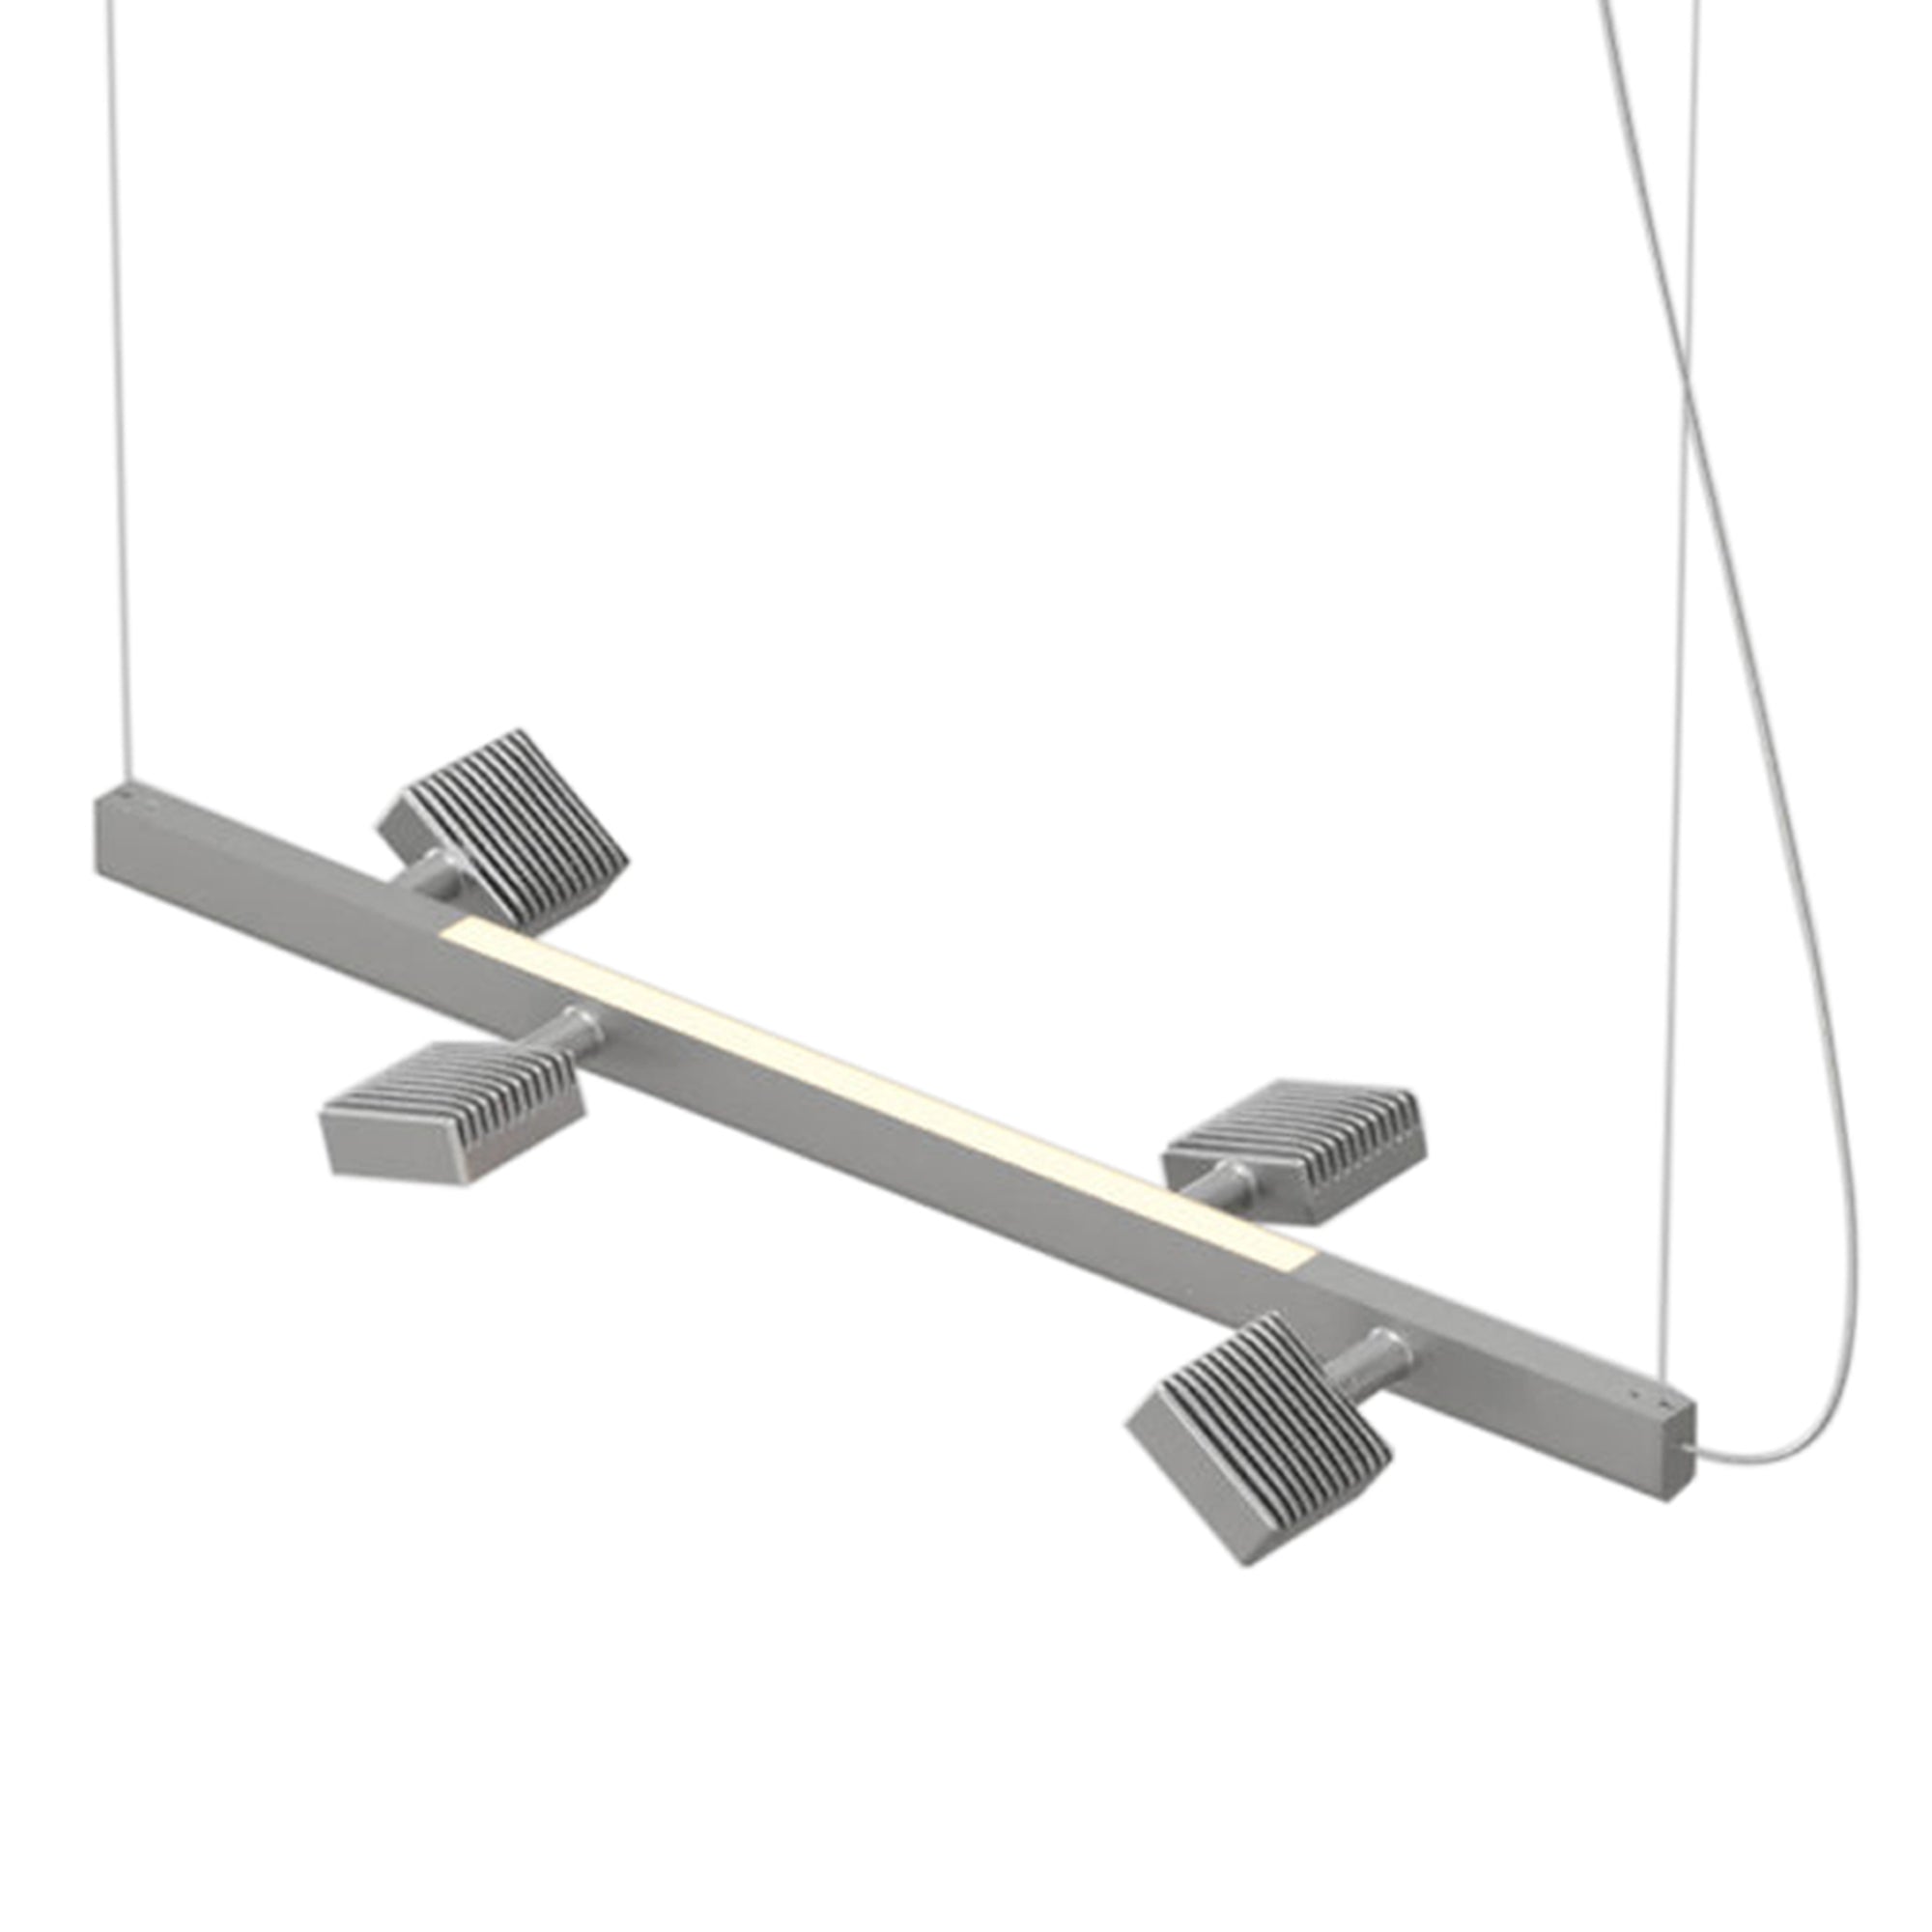 Dorval 05 Suspension Lamp with Uplight: 4 Heads + Large - 96.1